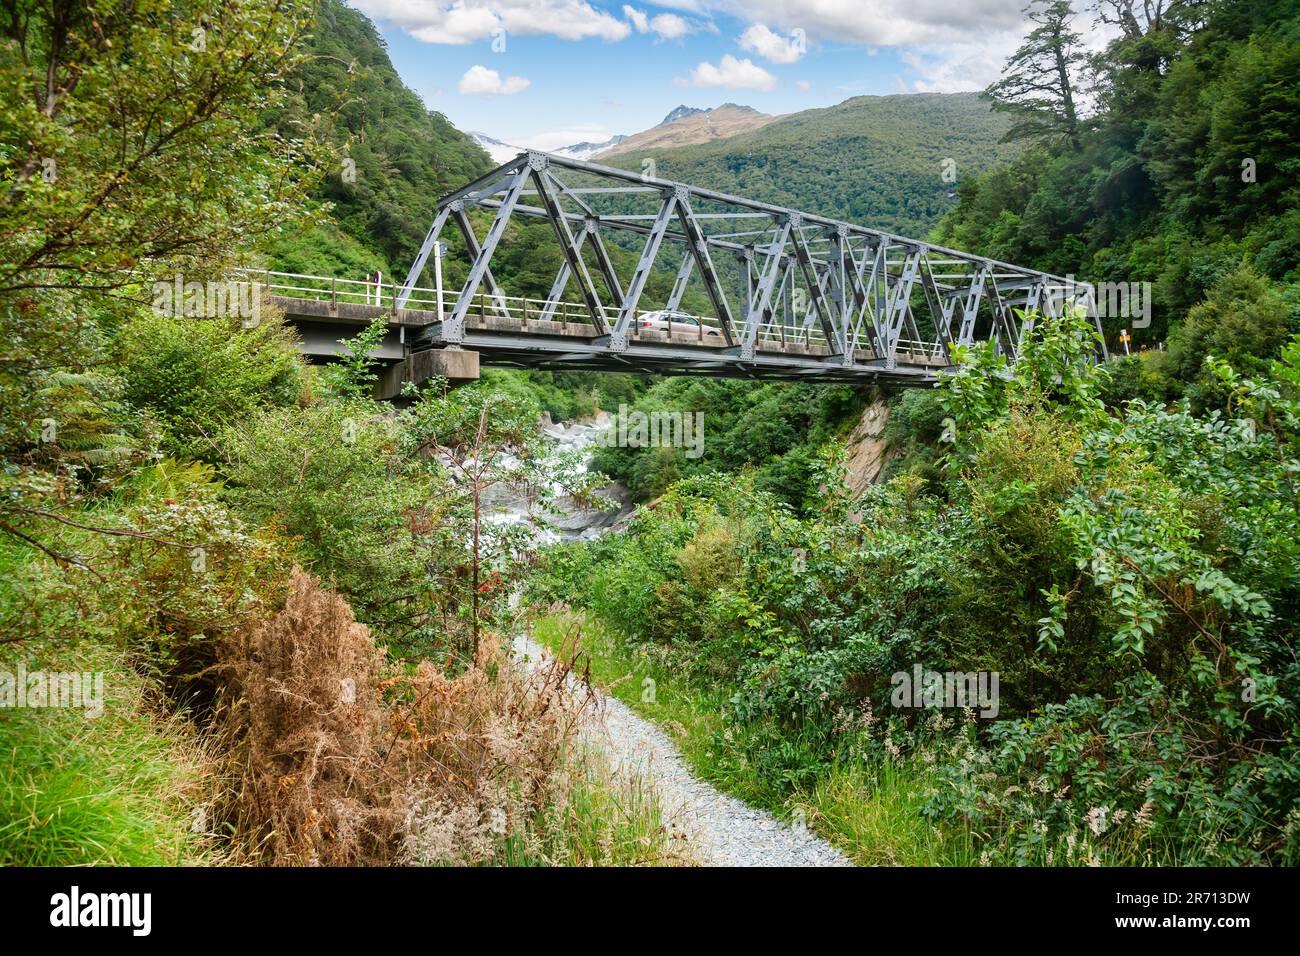 Single lane Callender-Hamilton steel truss bridge over the Haast River at Gates of Haast gorge in Mount Aspiring National Park, South Island of New Ze Stock Photo